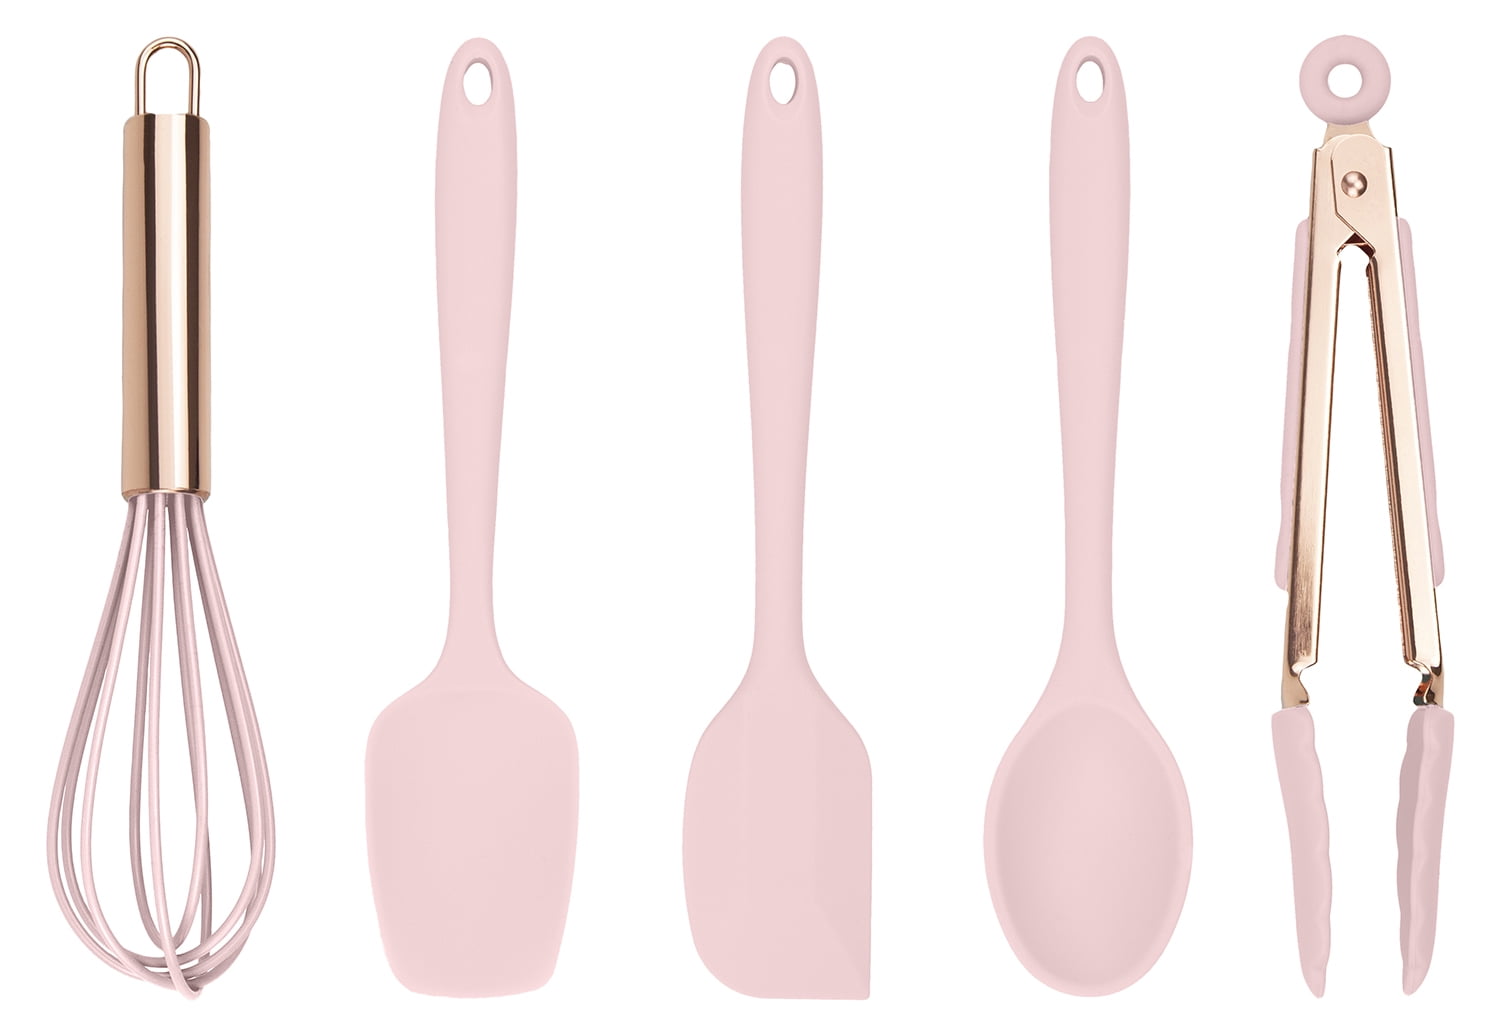 Cook with Color 3 Piece Color Changing Silicone Utensil Set with Pink Tong,  Teal Slotted Turner, and Yellow Spoon 